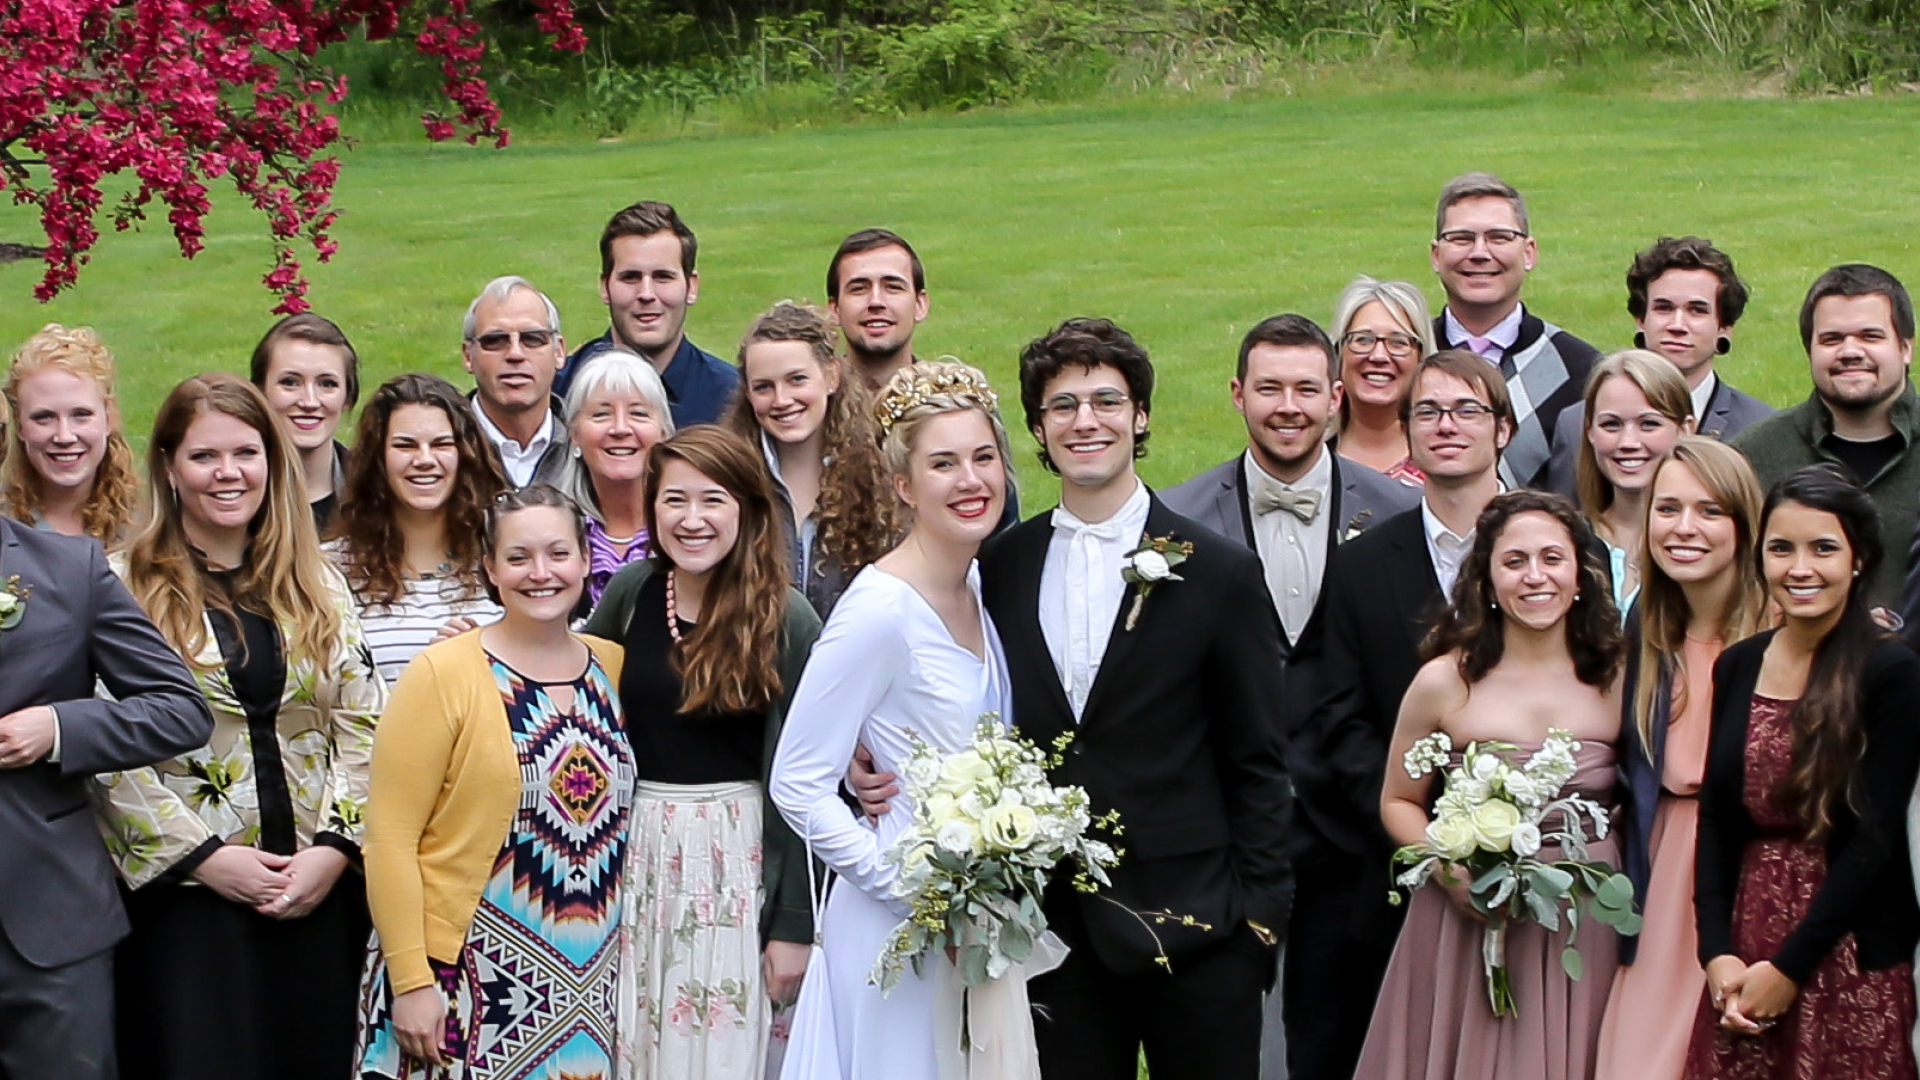 Kyle and Hilary Vegh at their wedding with a group of attendees.